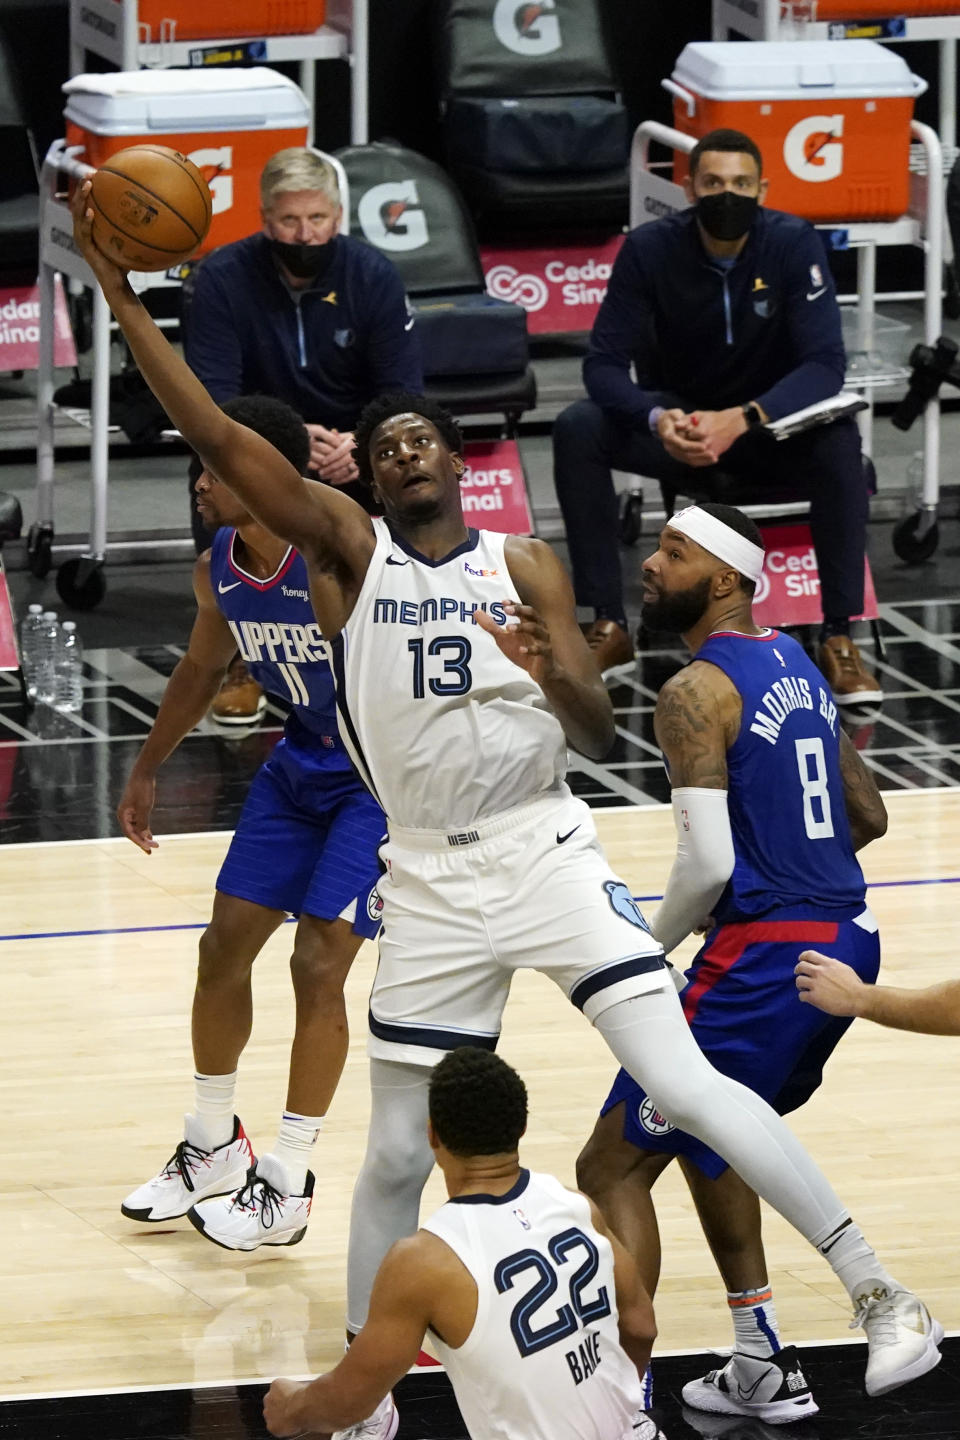 Memphis Grizzlies forward Jaren Jackson Jr. (13) grabs a high pass next to Los Angeles Clippers forward Marcus Morris Sr. (8) during the second half of an NBA basketball game Wednesday, April 21, 2021, in Los Angeles. (AP Photo/Marcio Jose Sanchez)